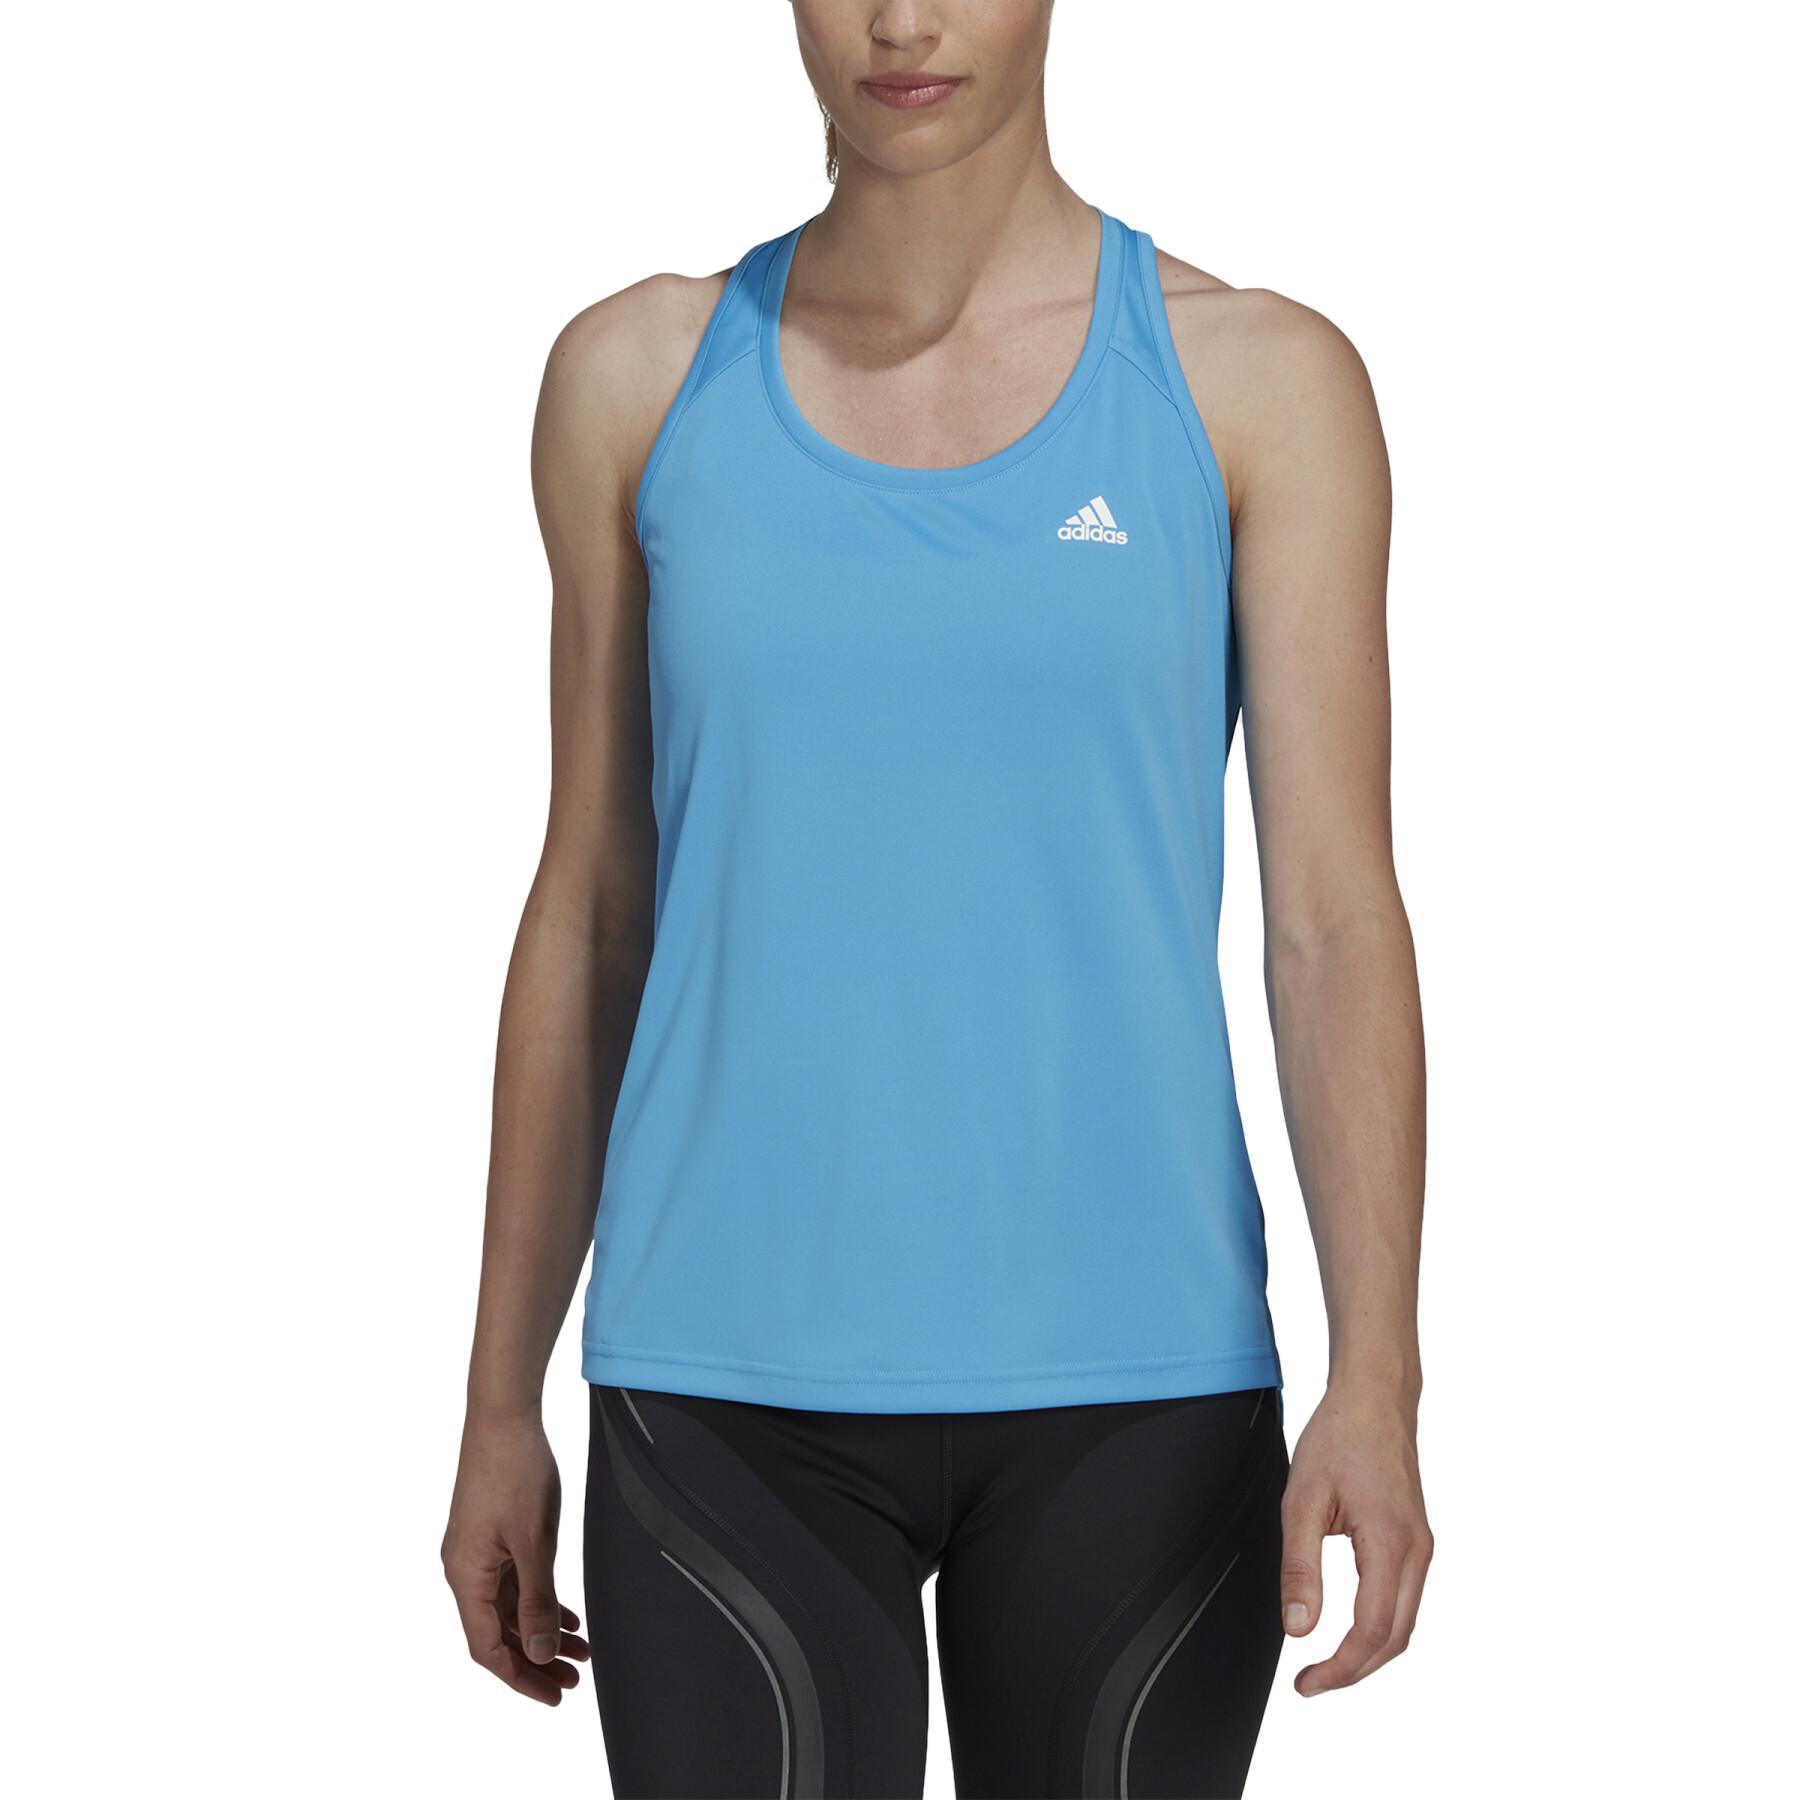 Women's tank top adidas Designed to Move sport